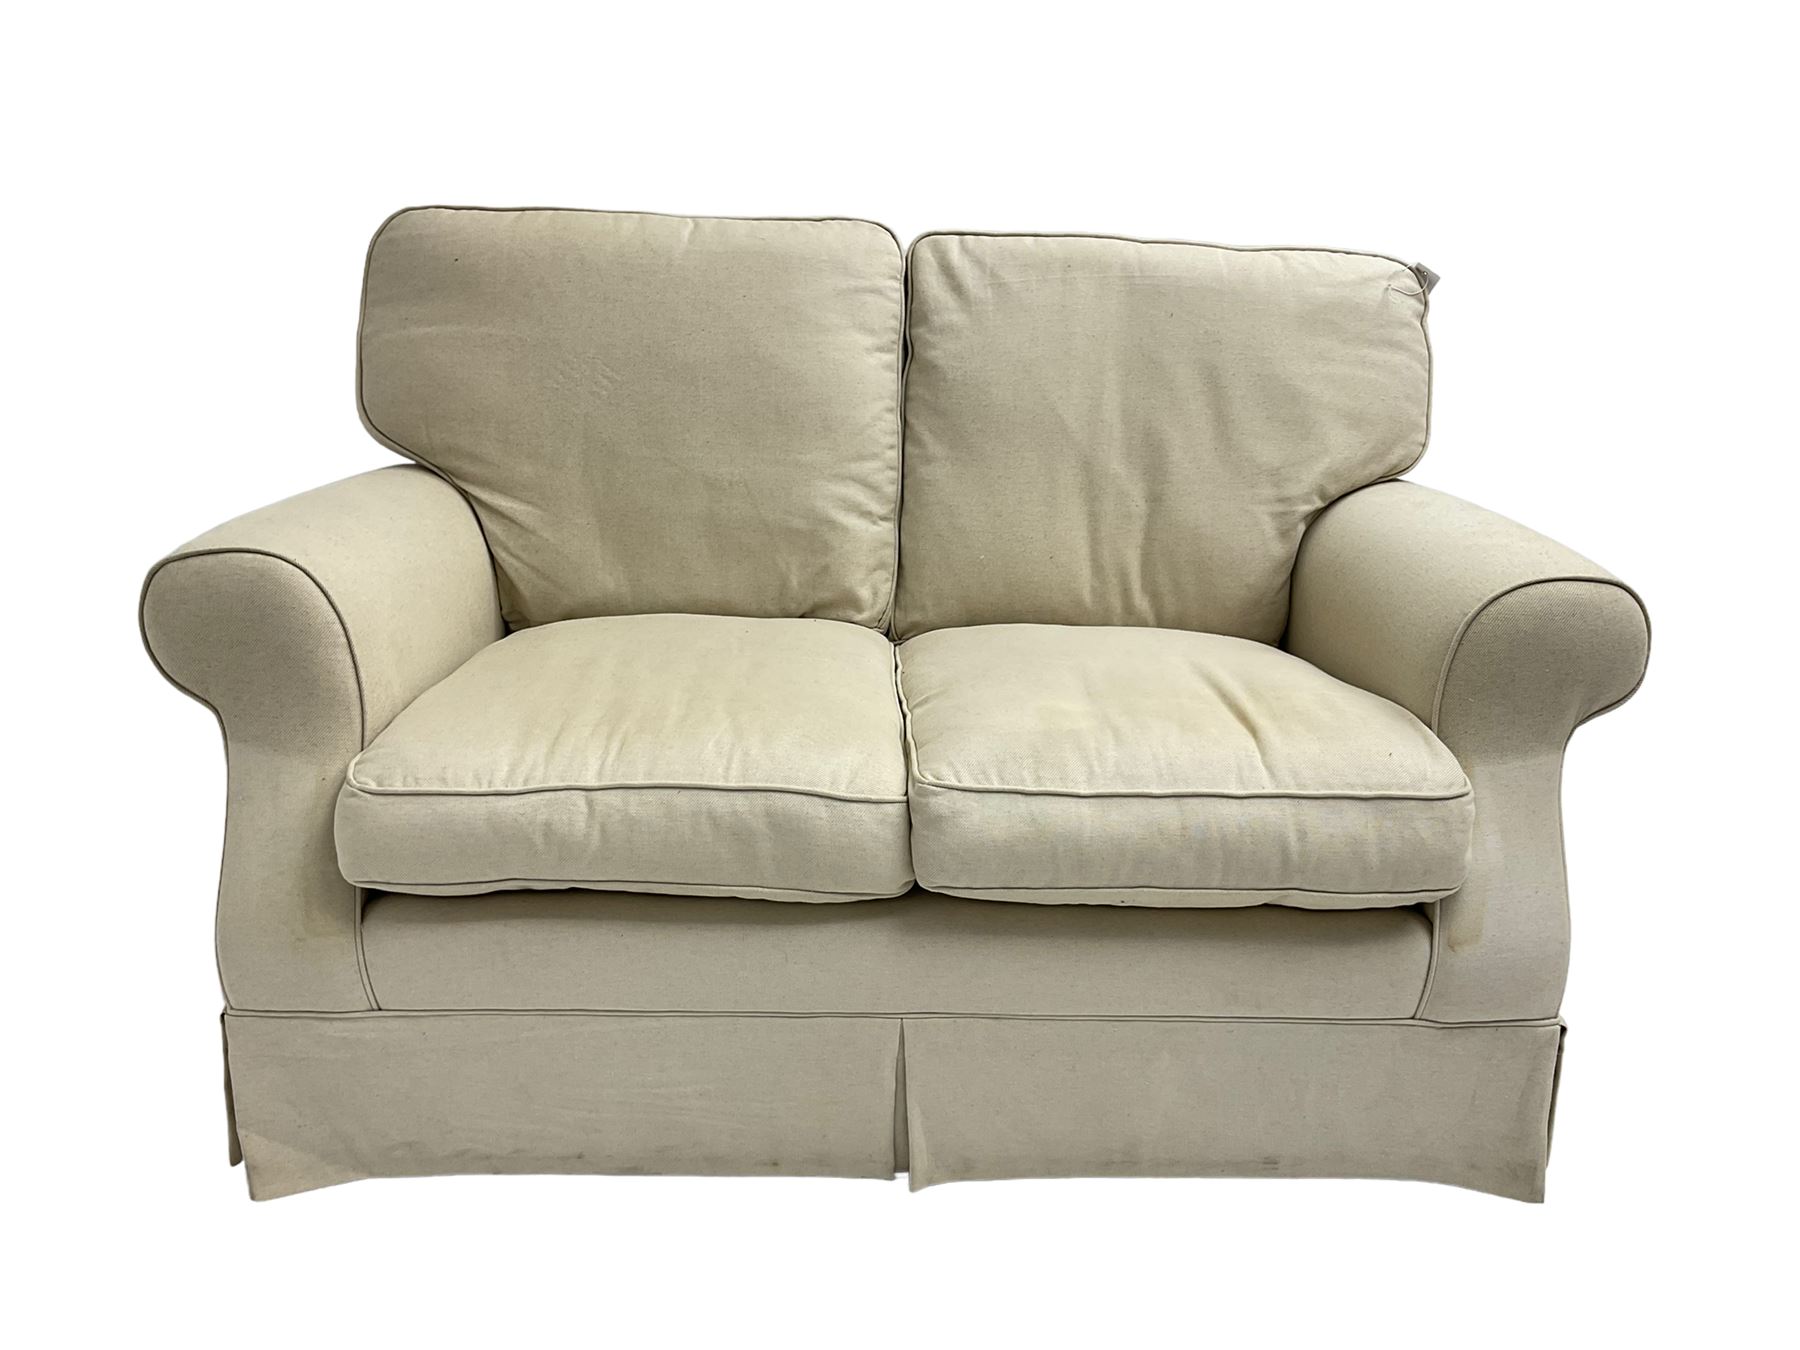 Duresta - traditional shape two seat sofa upholstered in beige linen fabric